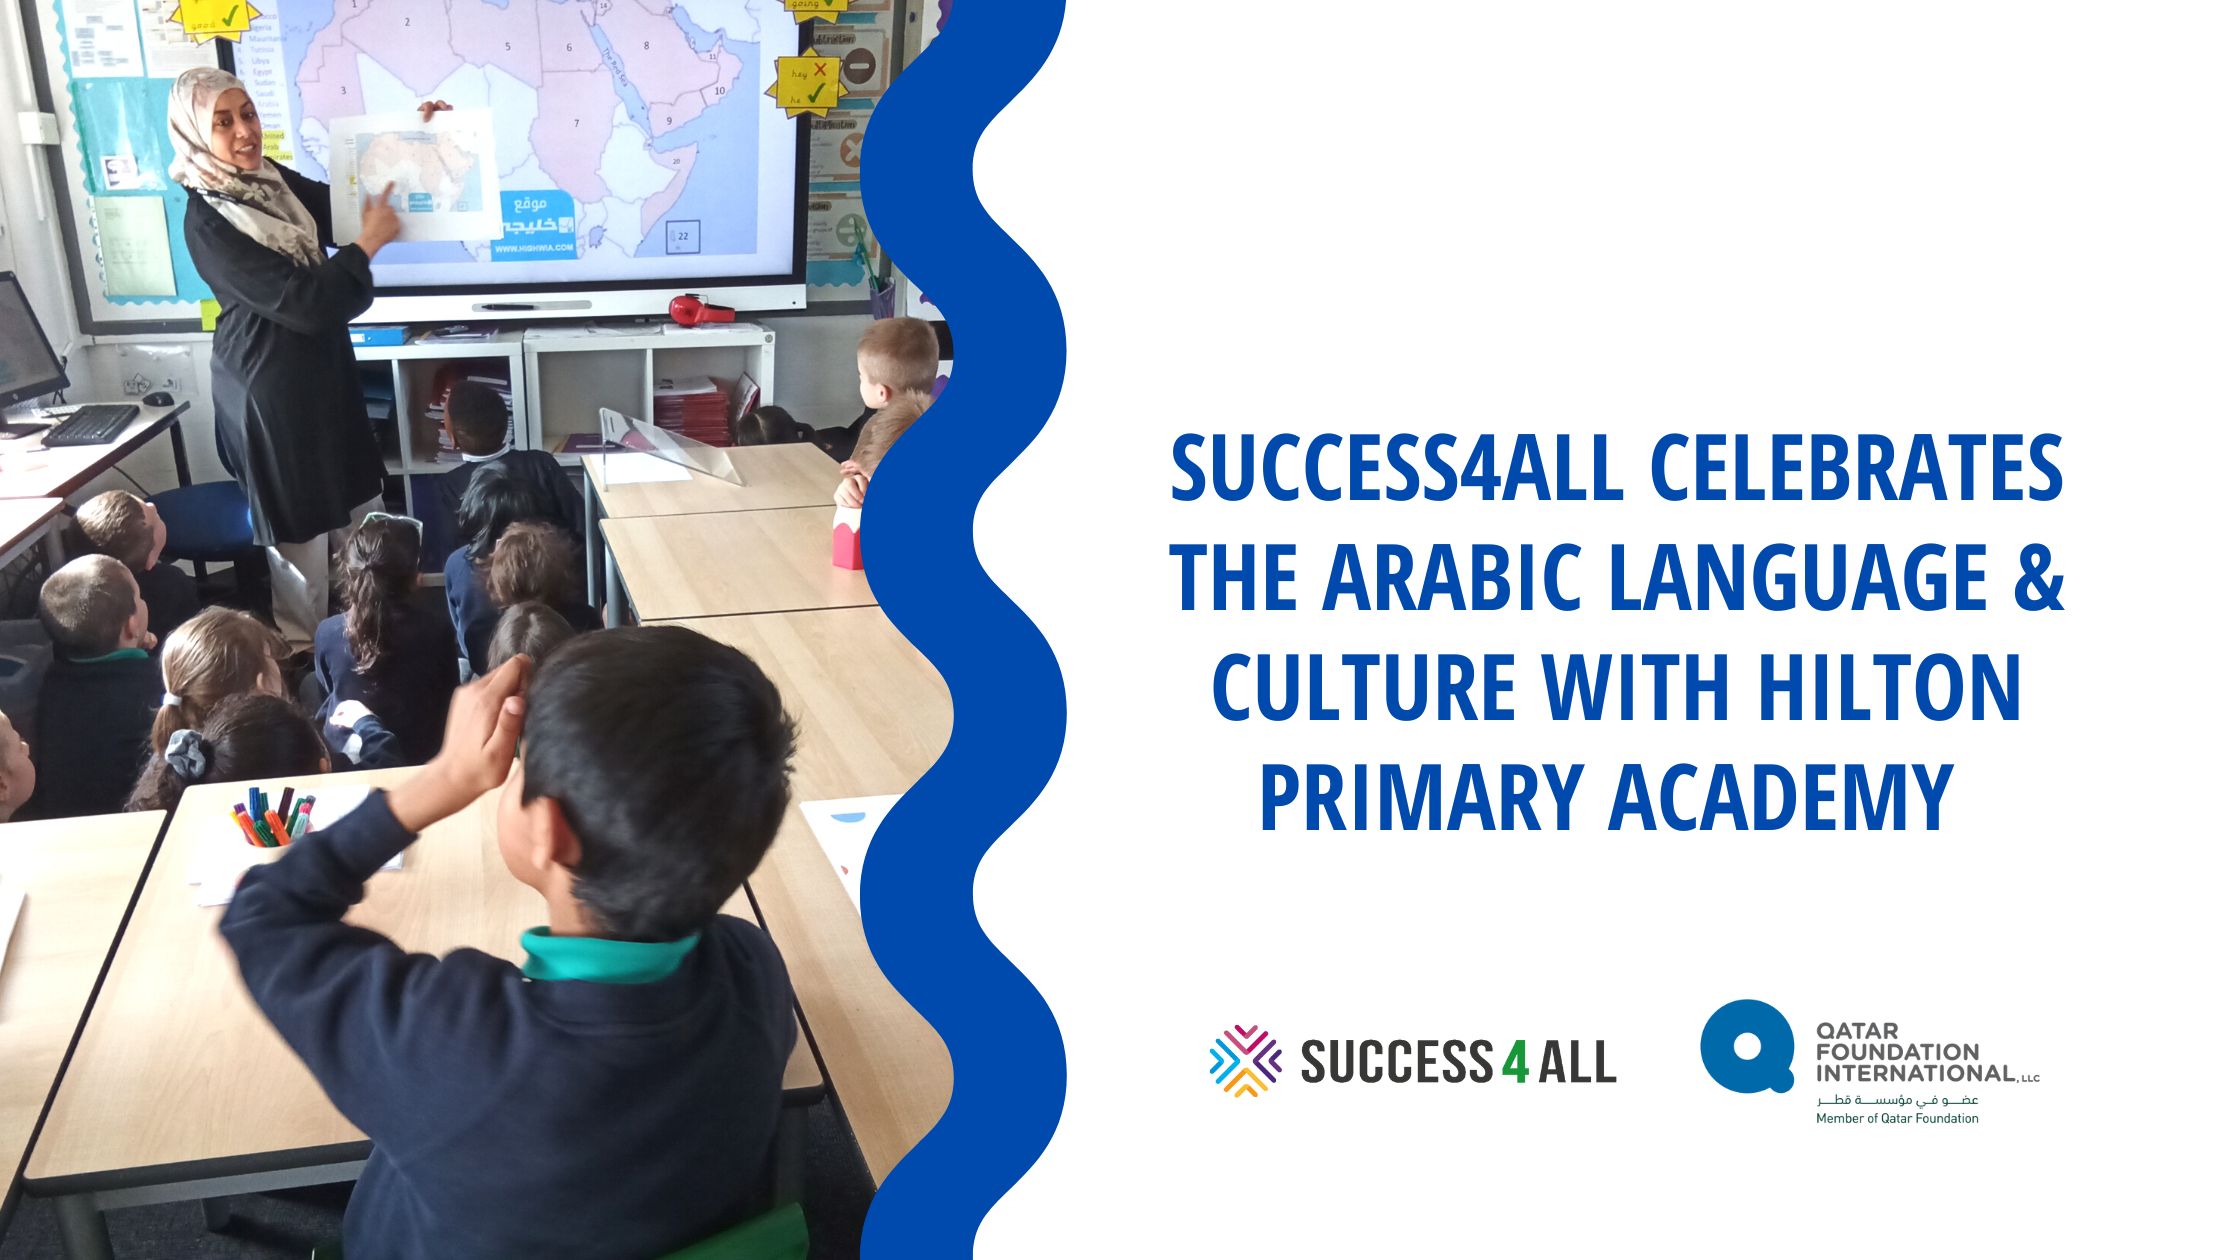 Success4All Celebrates the Arabic Language & Culture With Hilton Primary Academy 